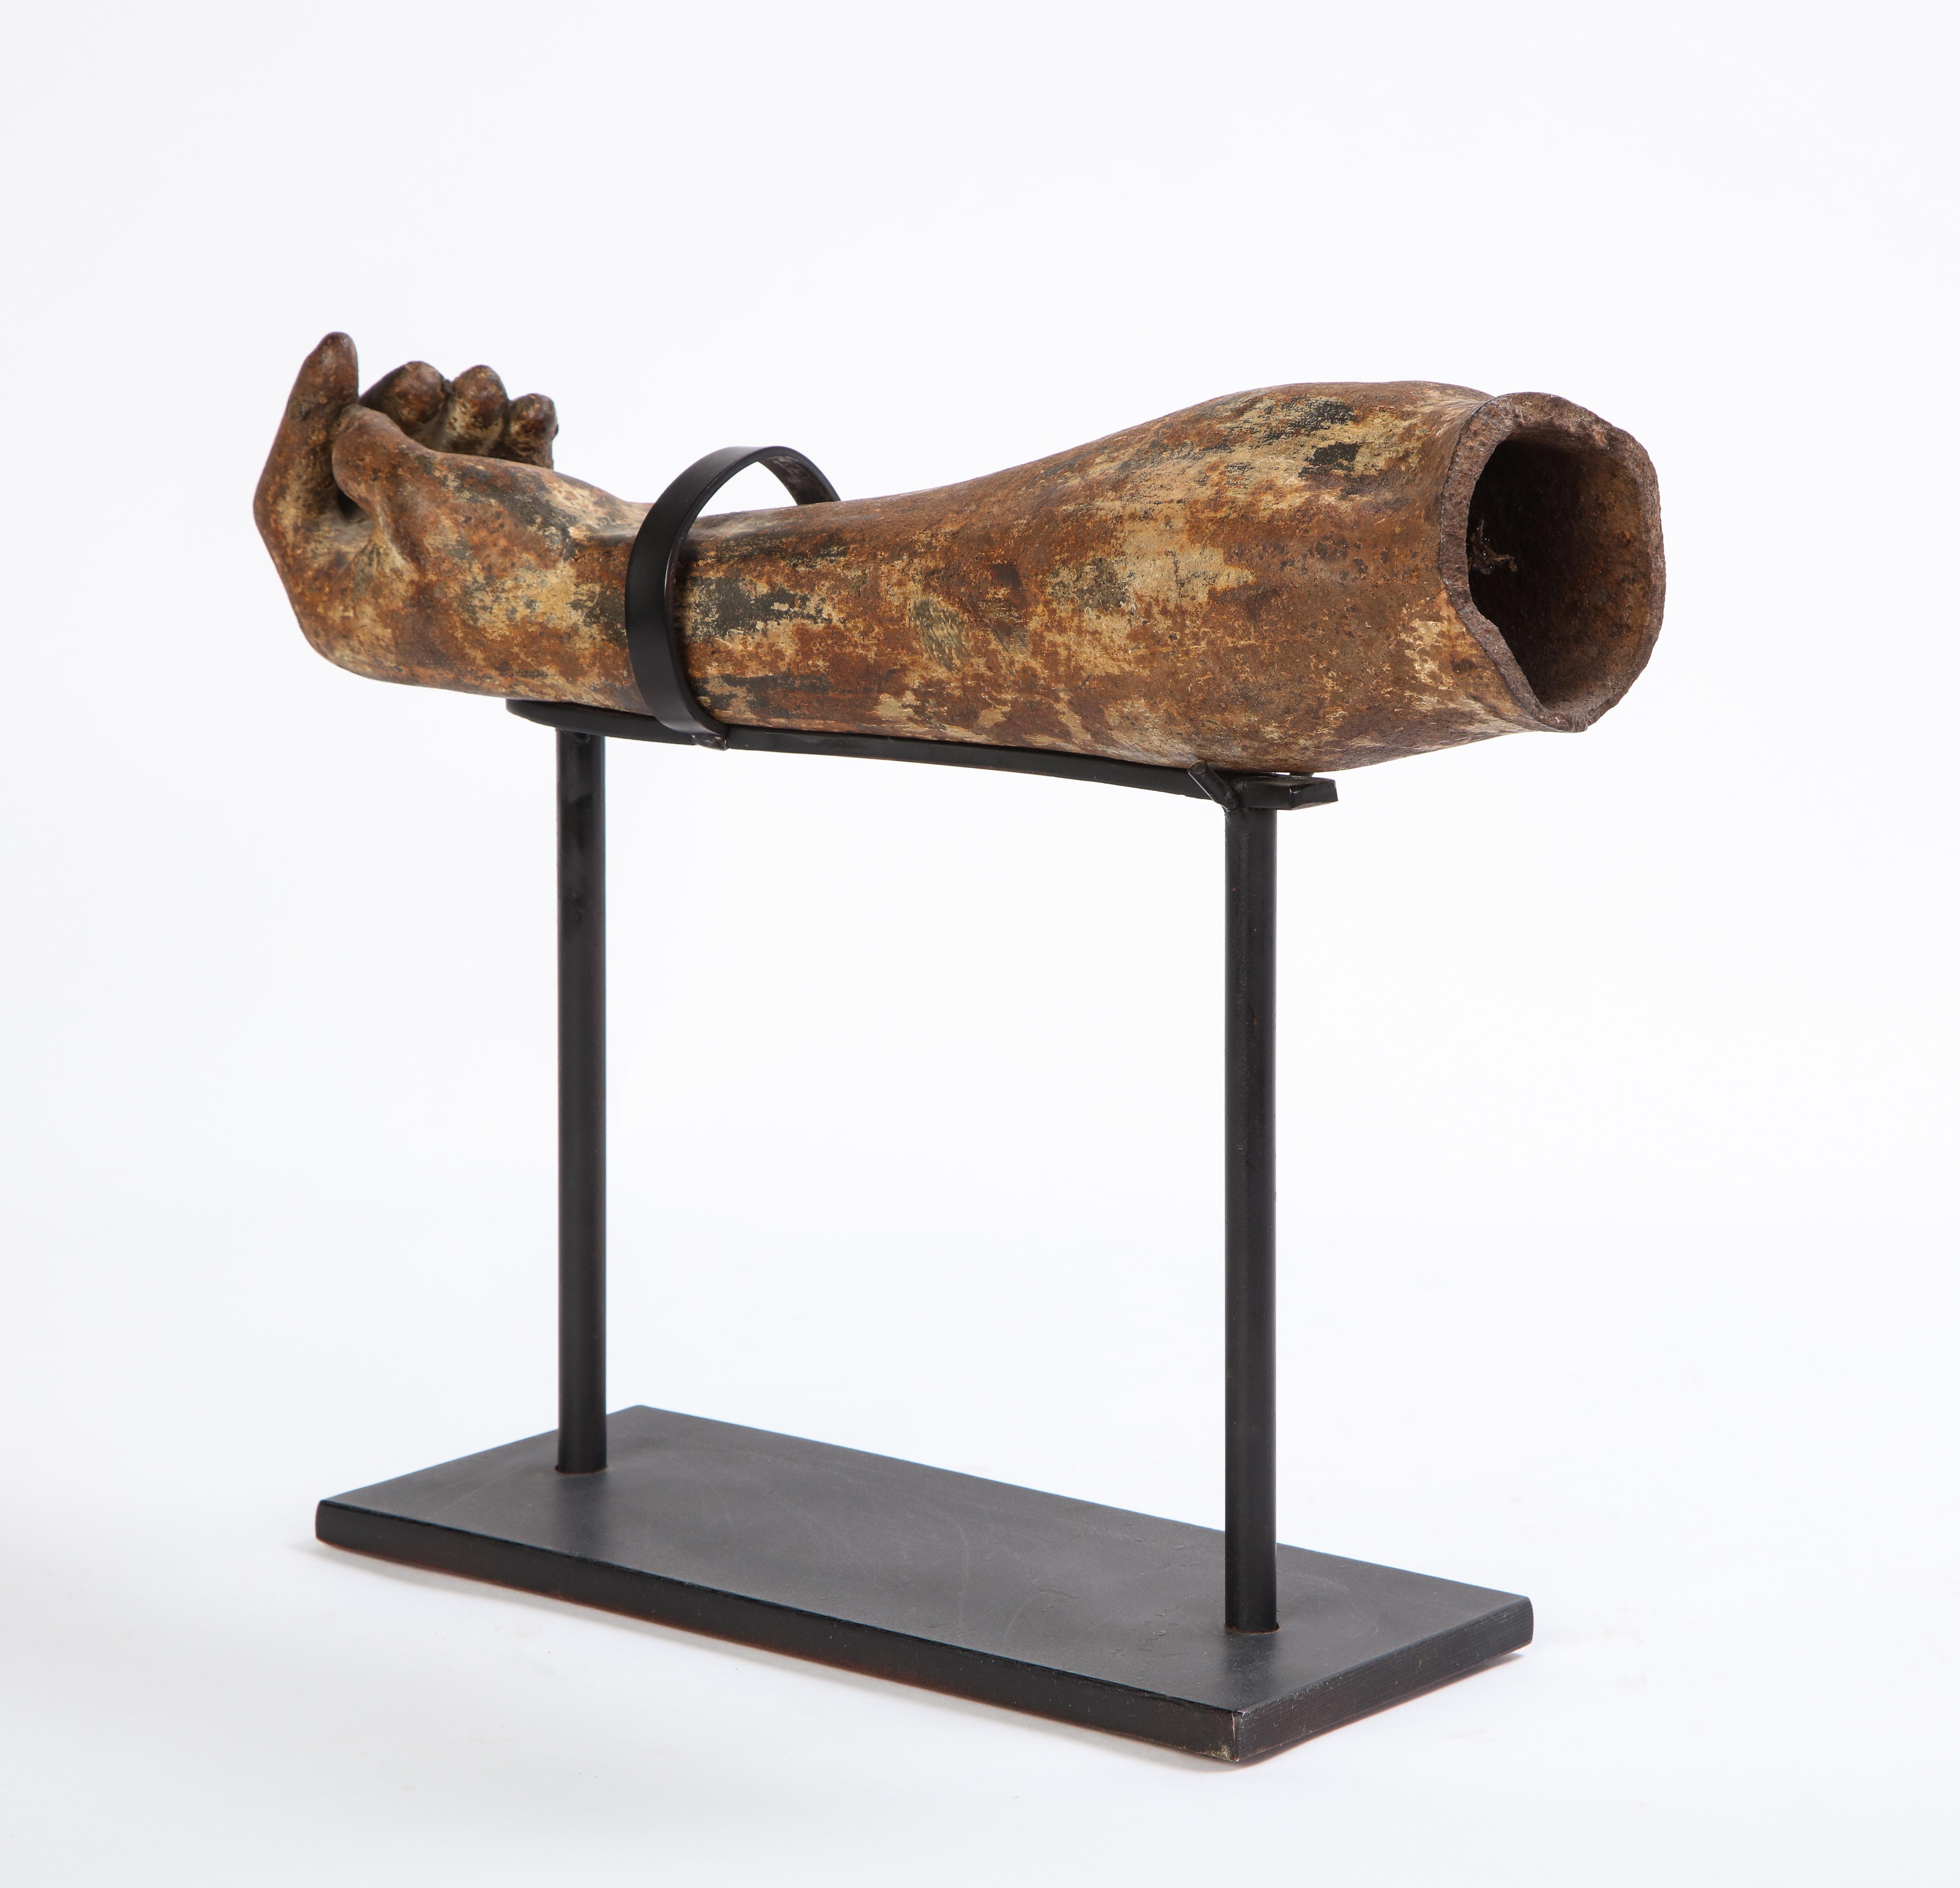 Patinated Metal Arm Fragment on Metal Stand, 20th Century